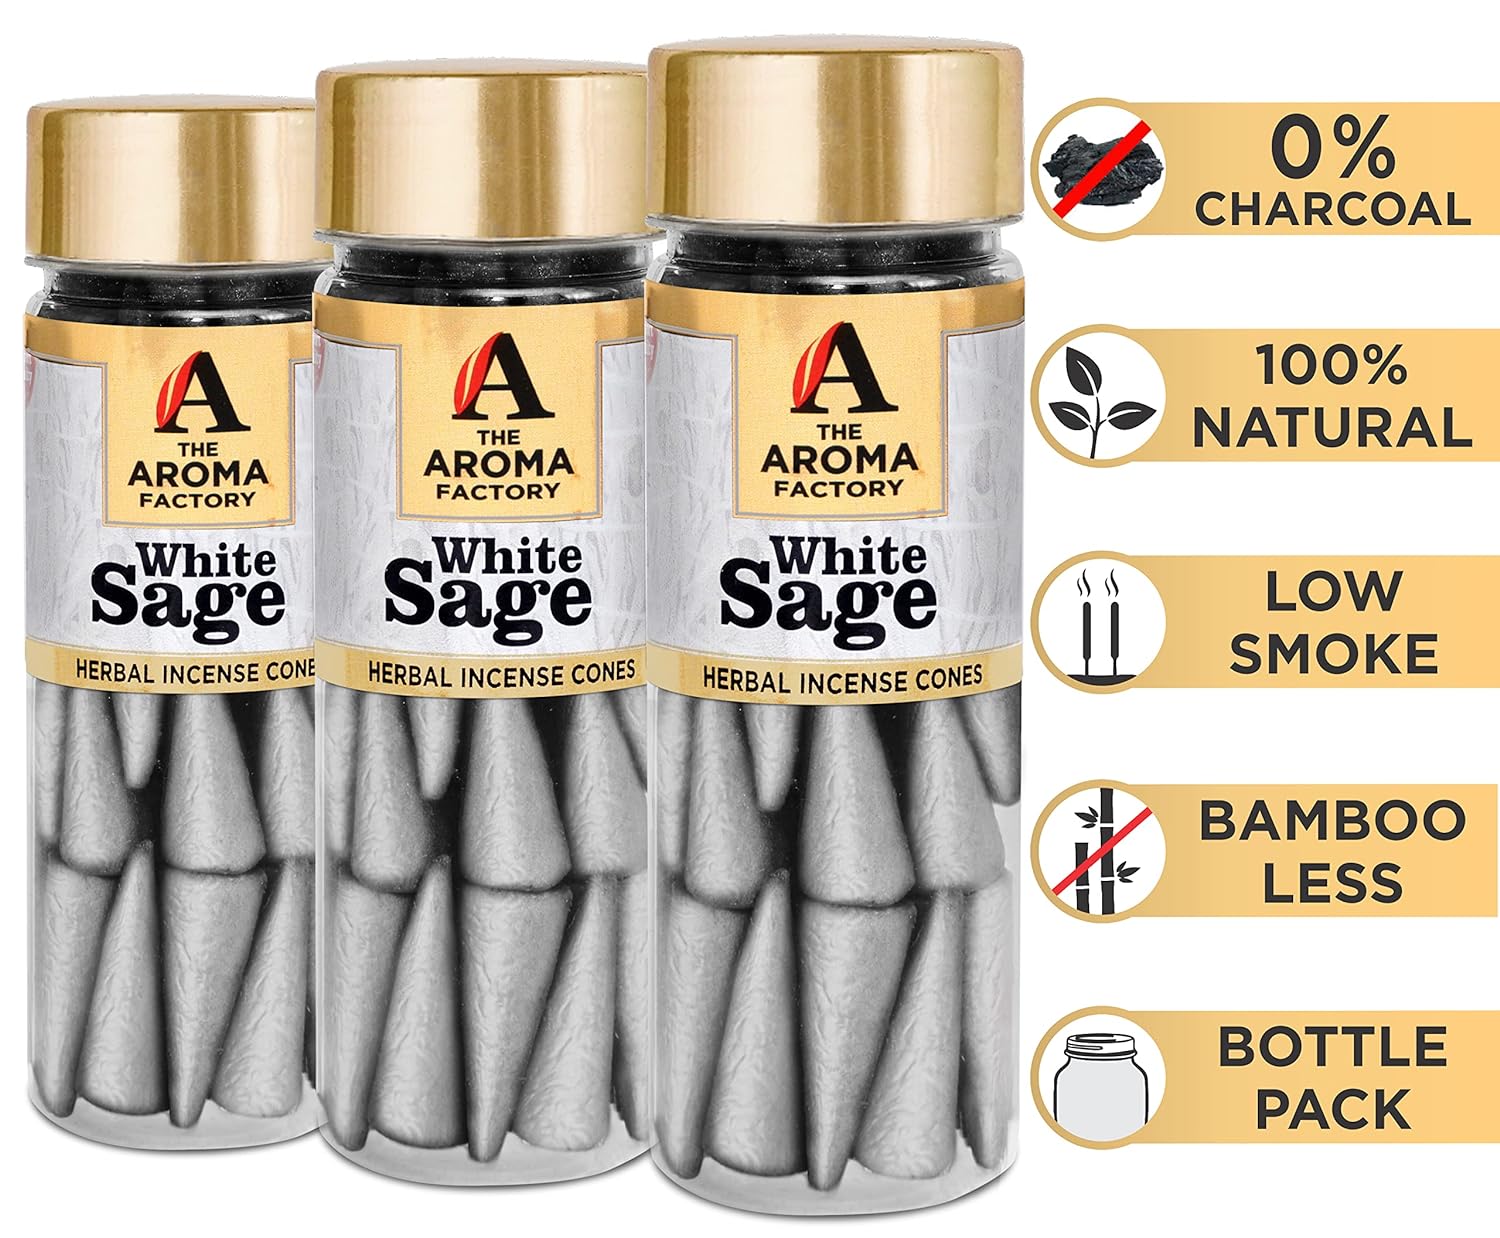 The Aroma Factory Incense Dhoop Cone, White Sage (100% Herbal & 0% Charcoal) 3 Bottles x 30 Cones